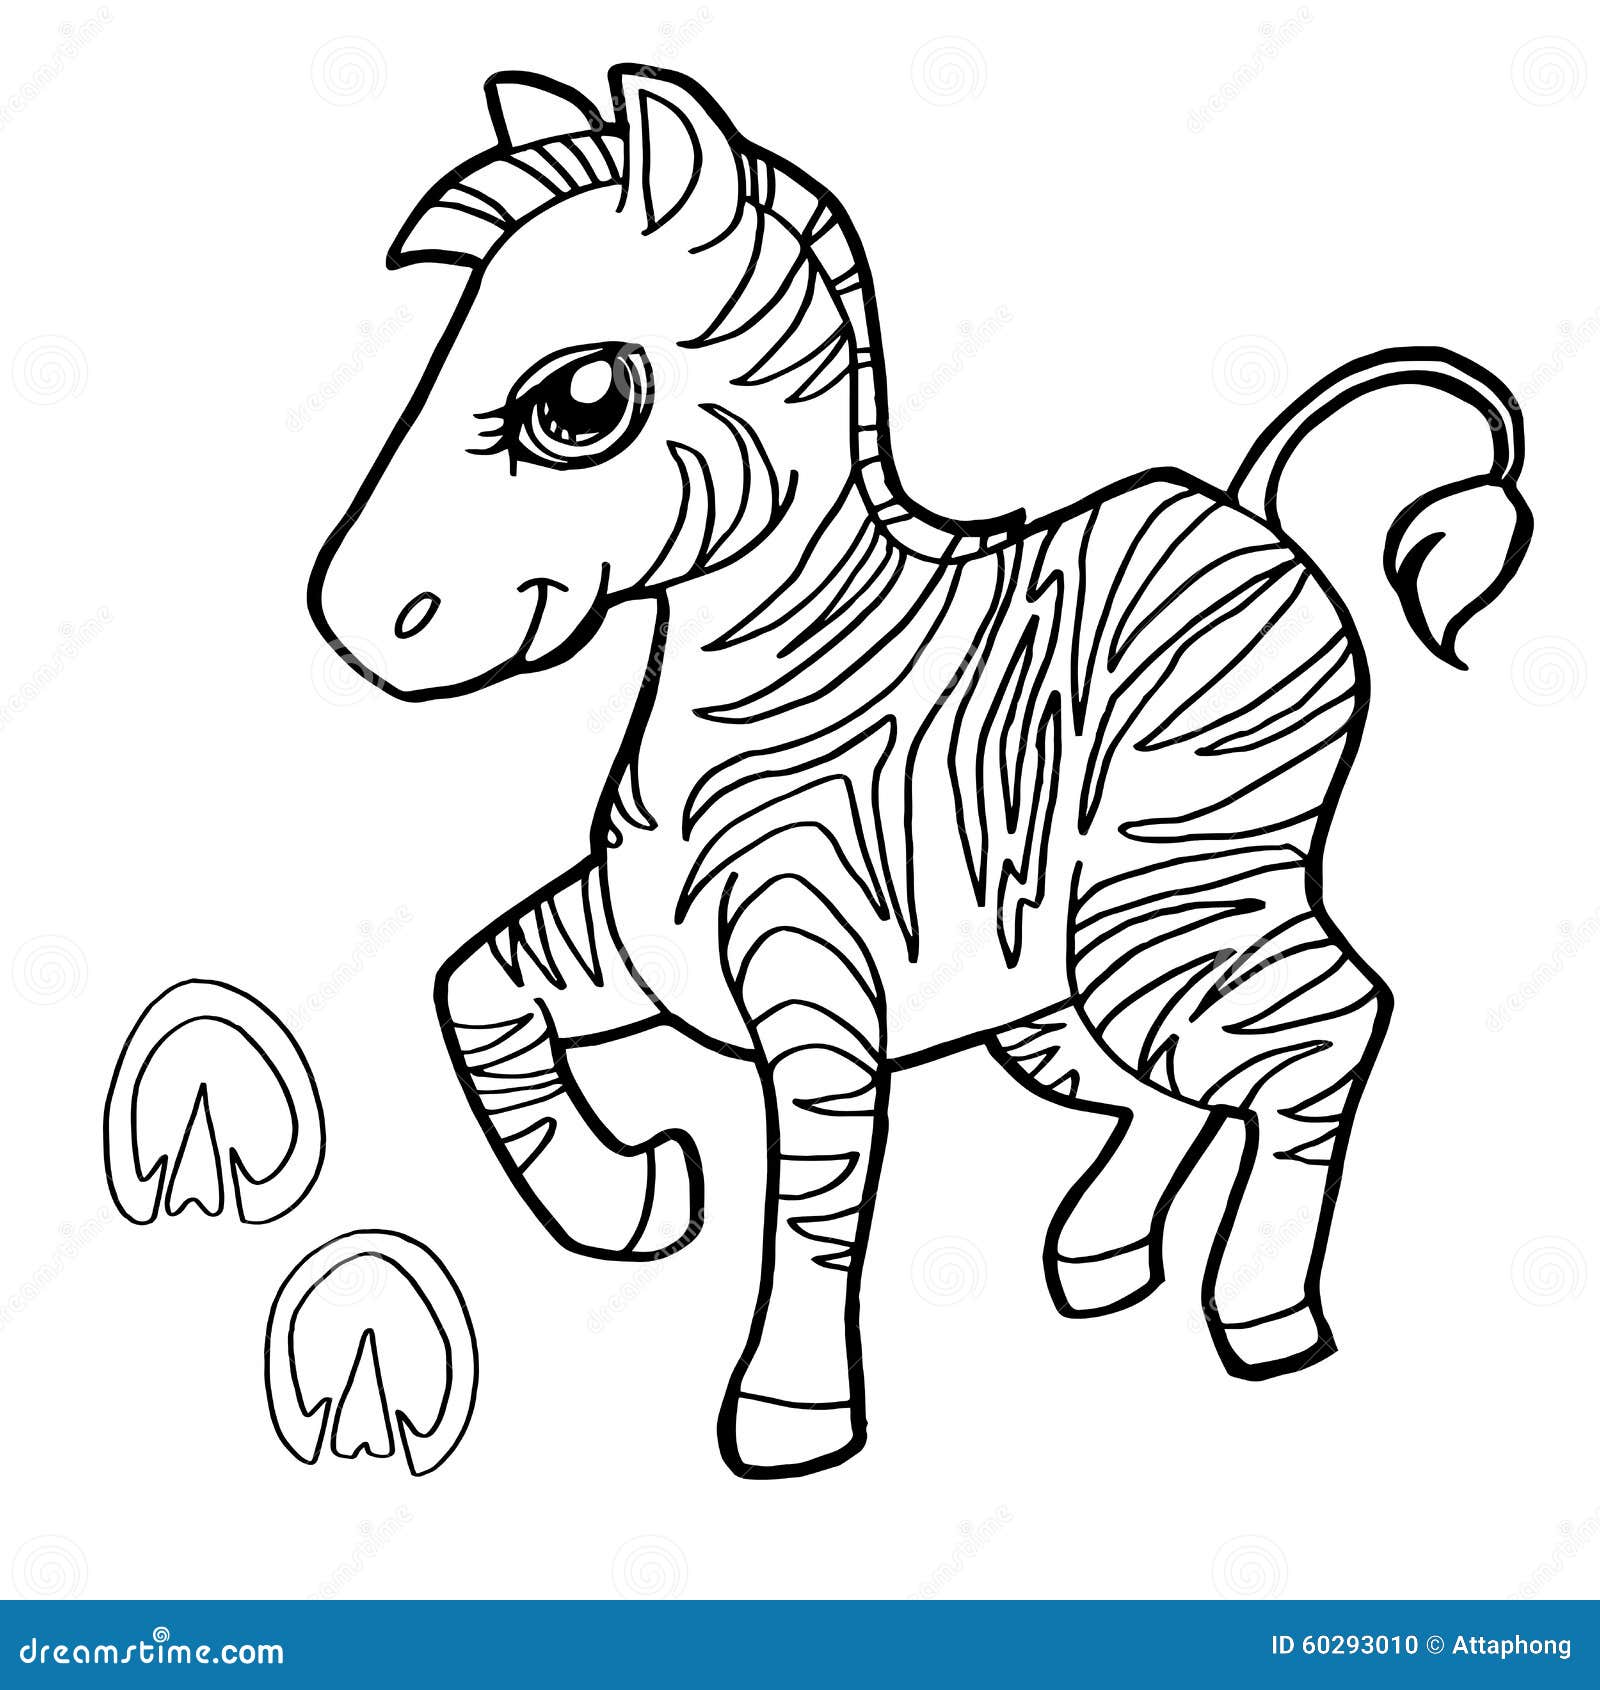 Download Paw Print With Zebra Coloring Pages Vector Stock Vector - Illustration of cartoon, print: 60293010